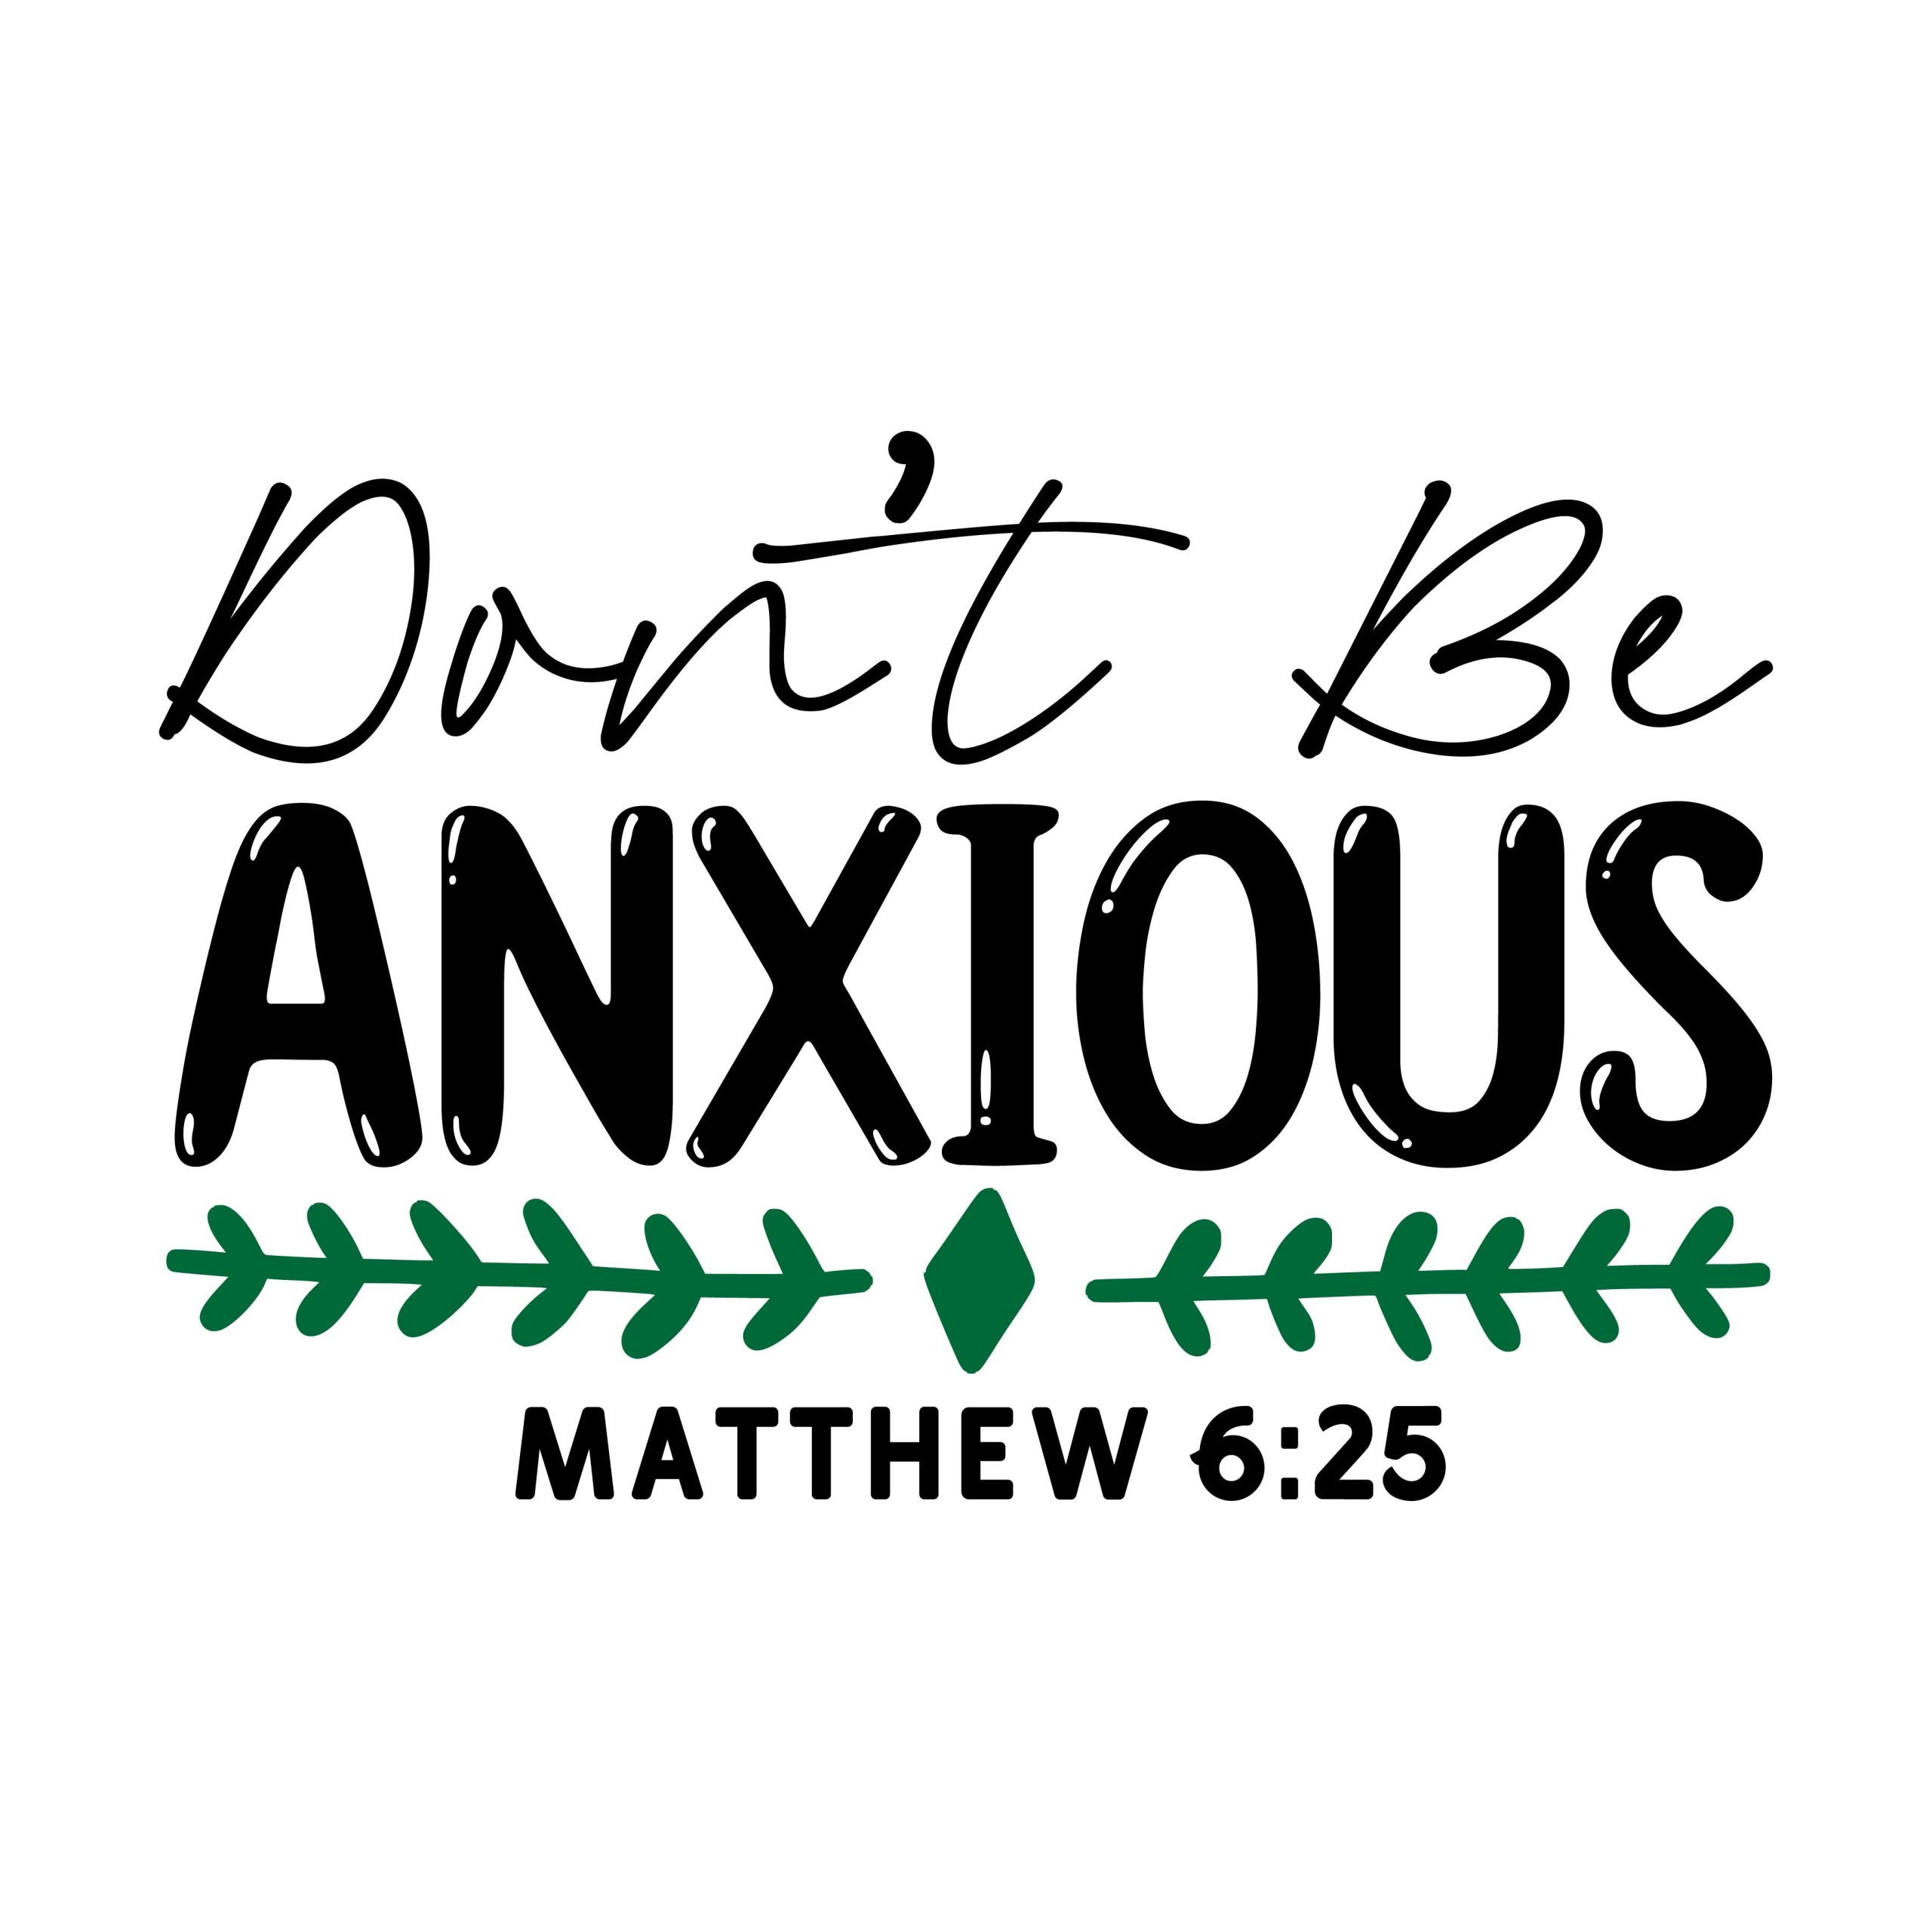 Don't be anxious Matthew 6:25, bible verses, scripture verses, svg files, passages, sayings, cricut designs, silhouette, embroidery, bundle, free cut files, design space, vector